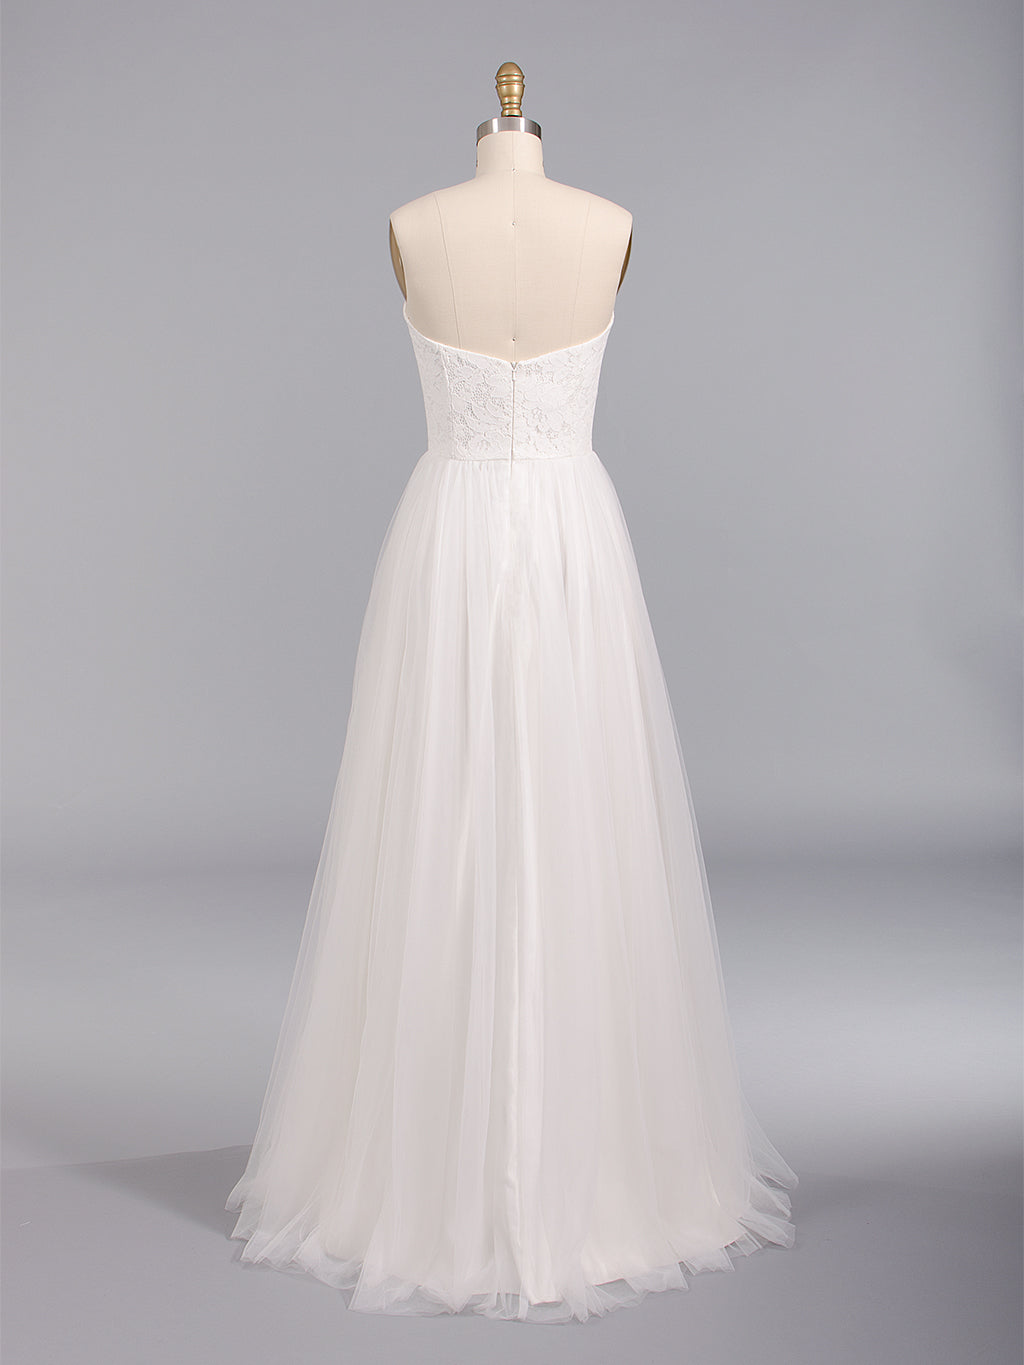 Ivory strapless lace wedding dress with tulle skirt 4022